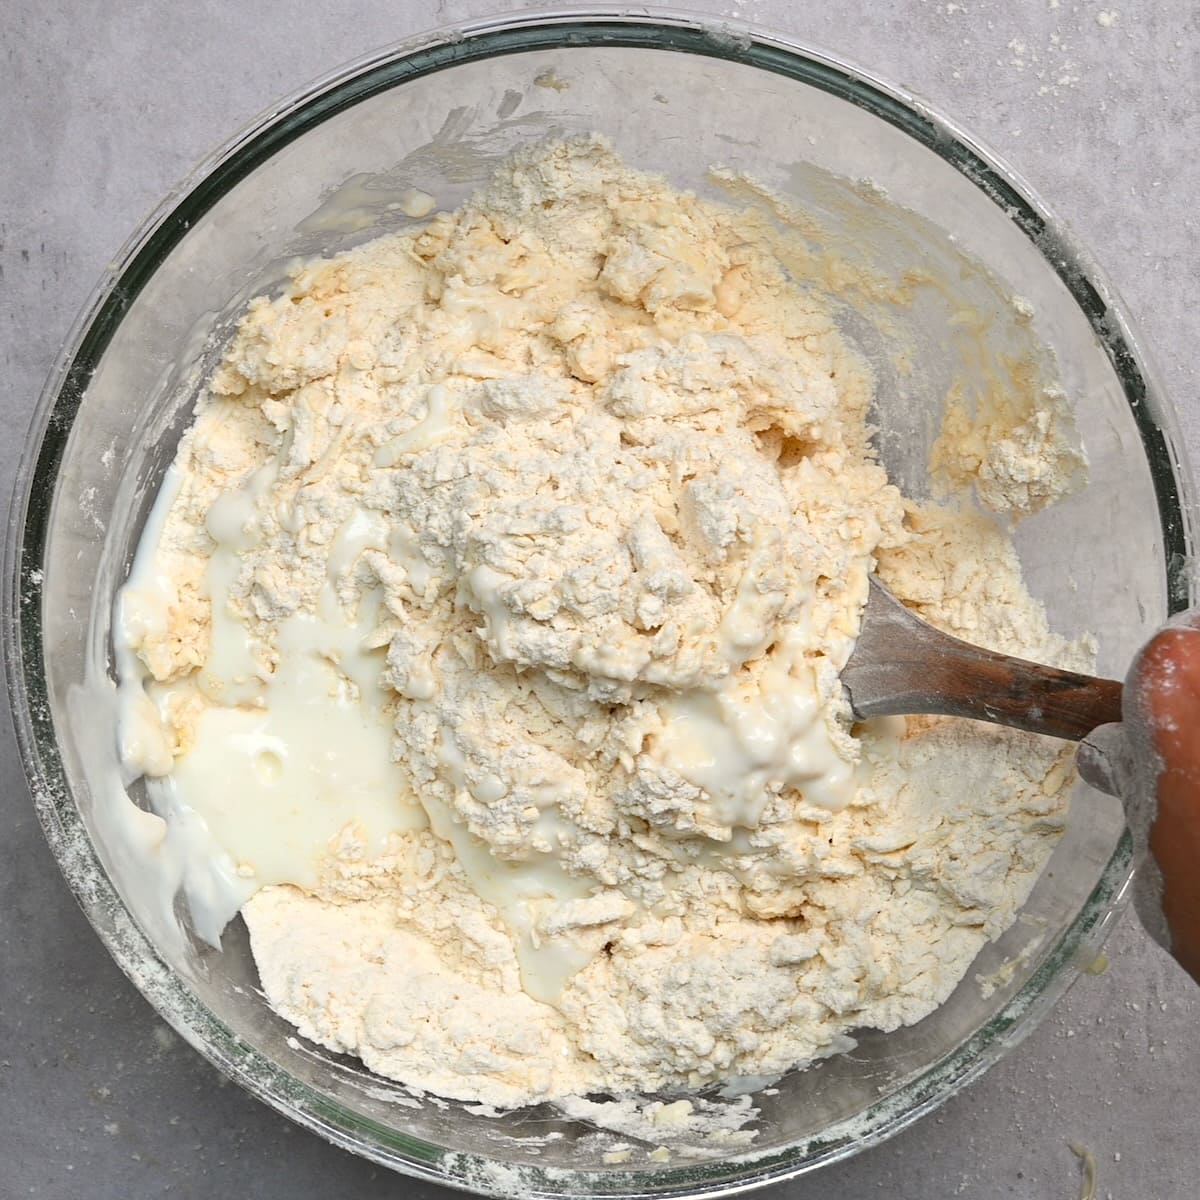 Buttermilk added to dough in a bowl